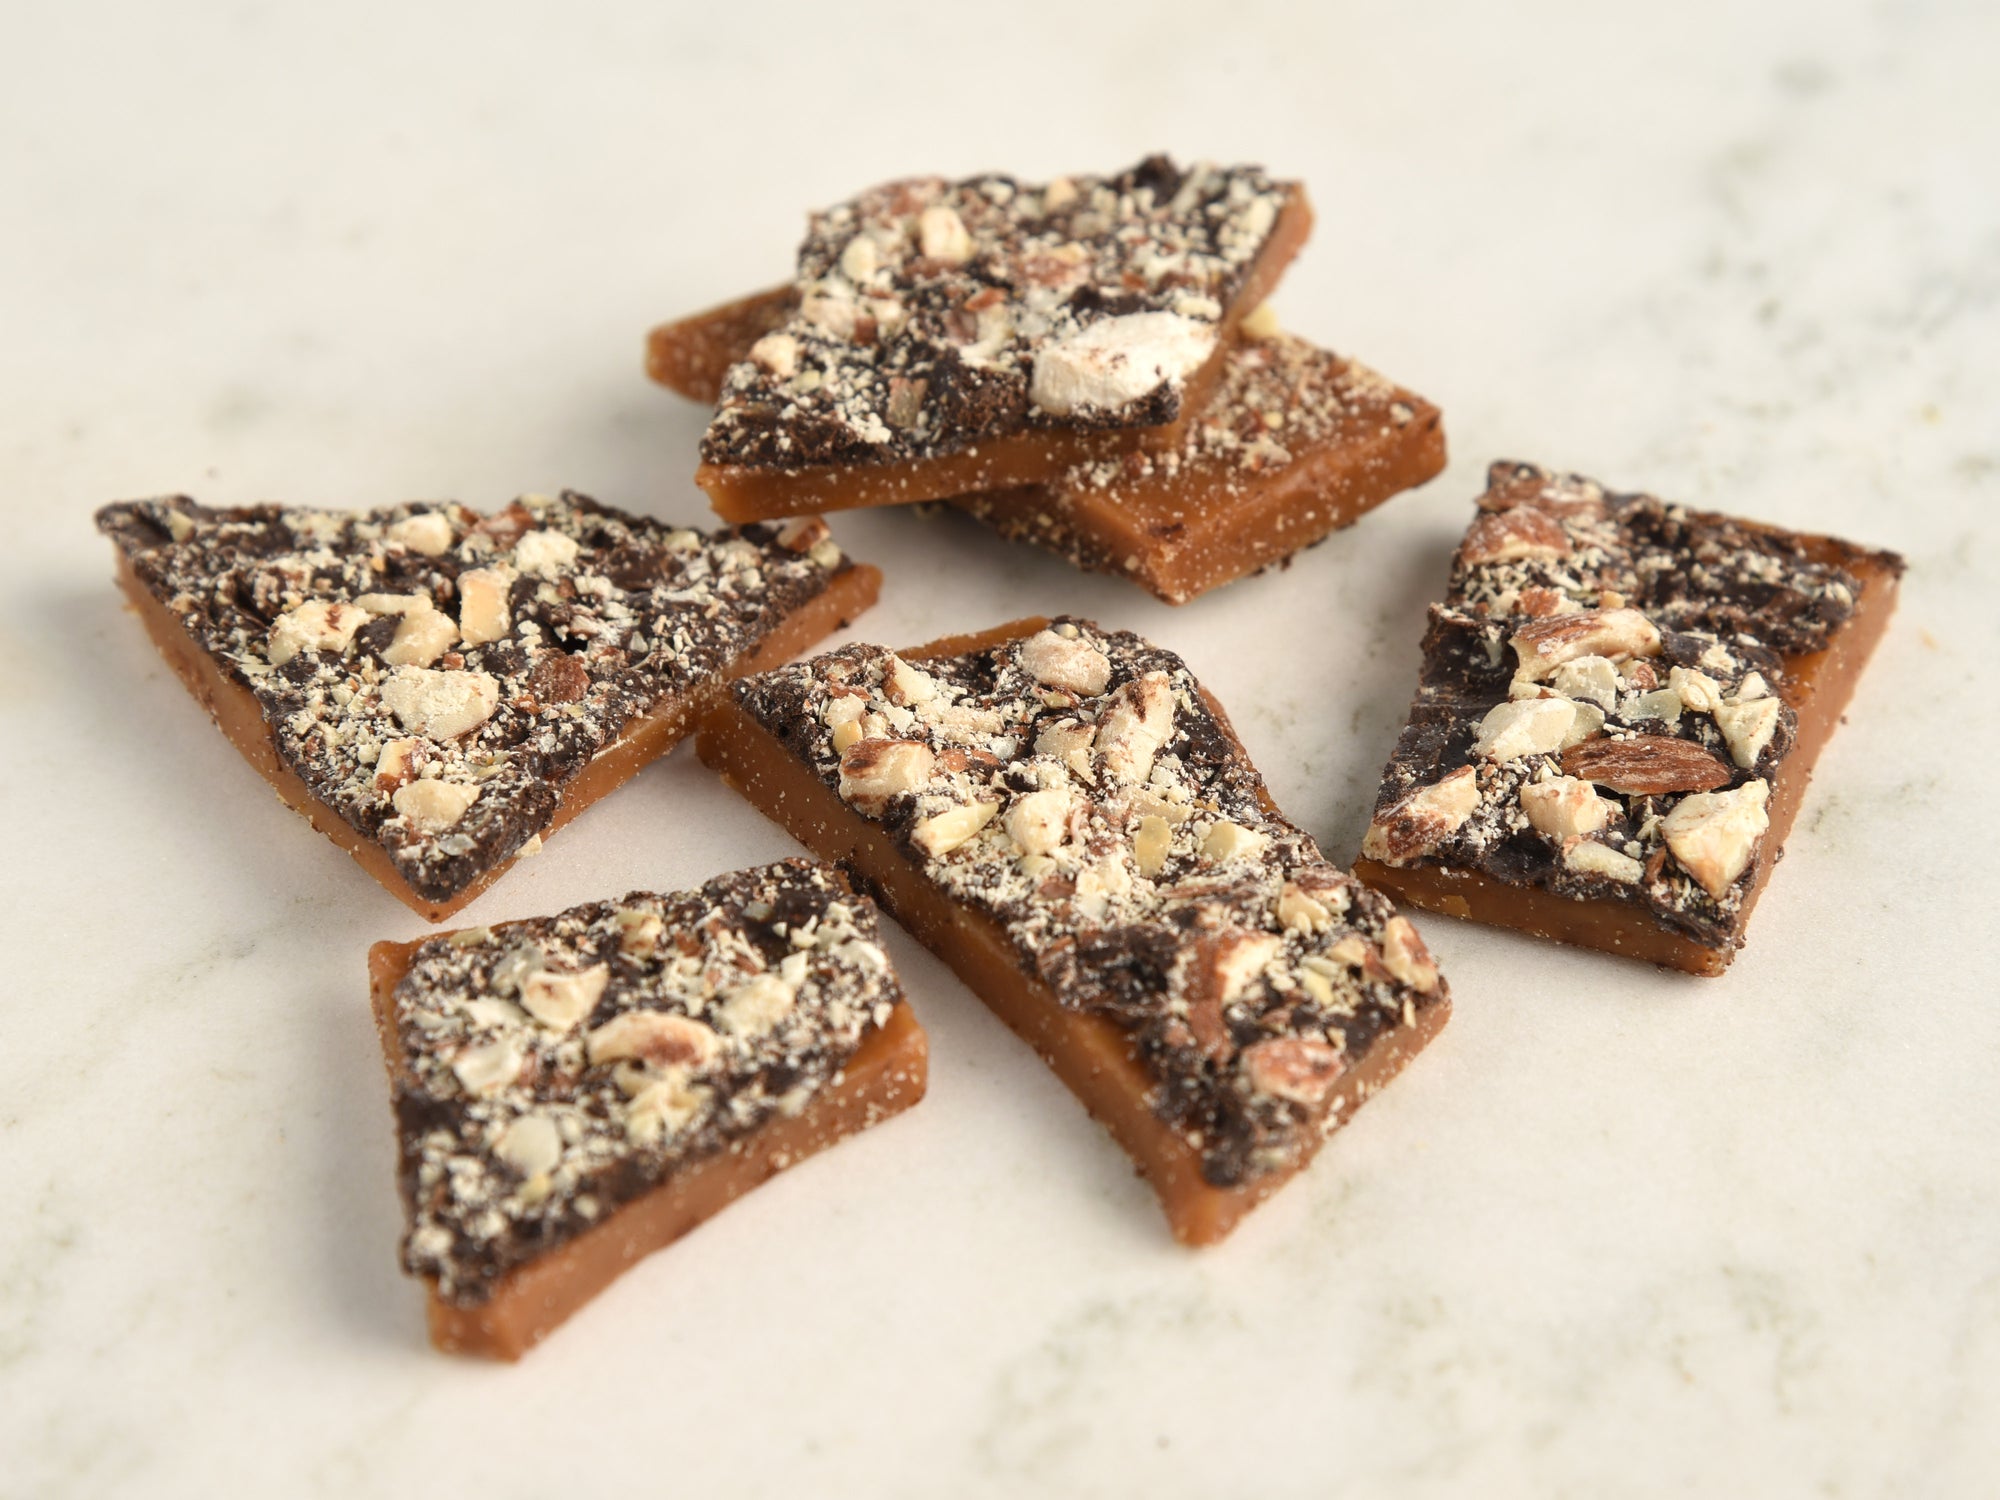 Cracked Toffee with Crushed Almonds